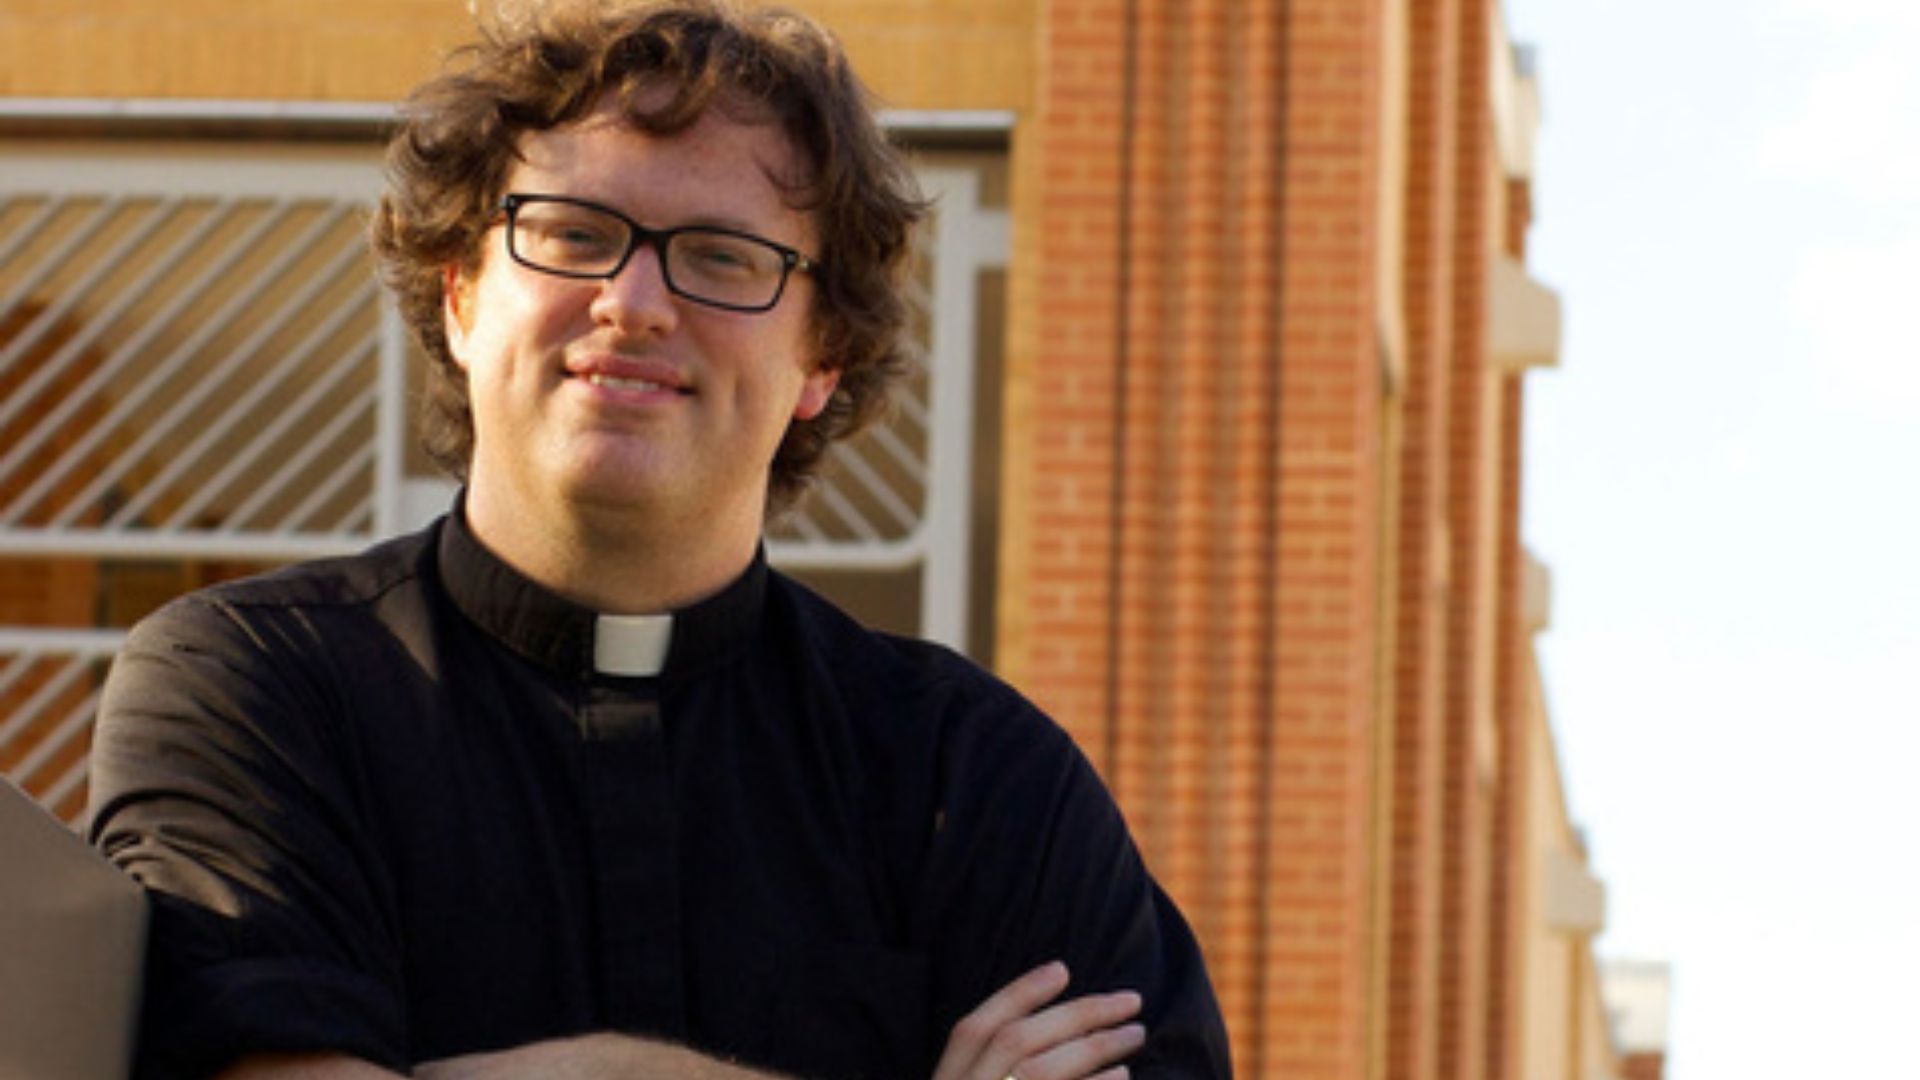 Fr. Josh Whitfield leads a three-day session